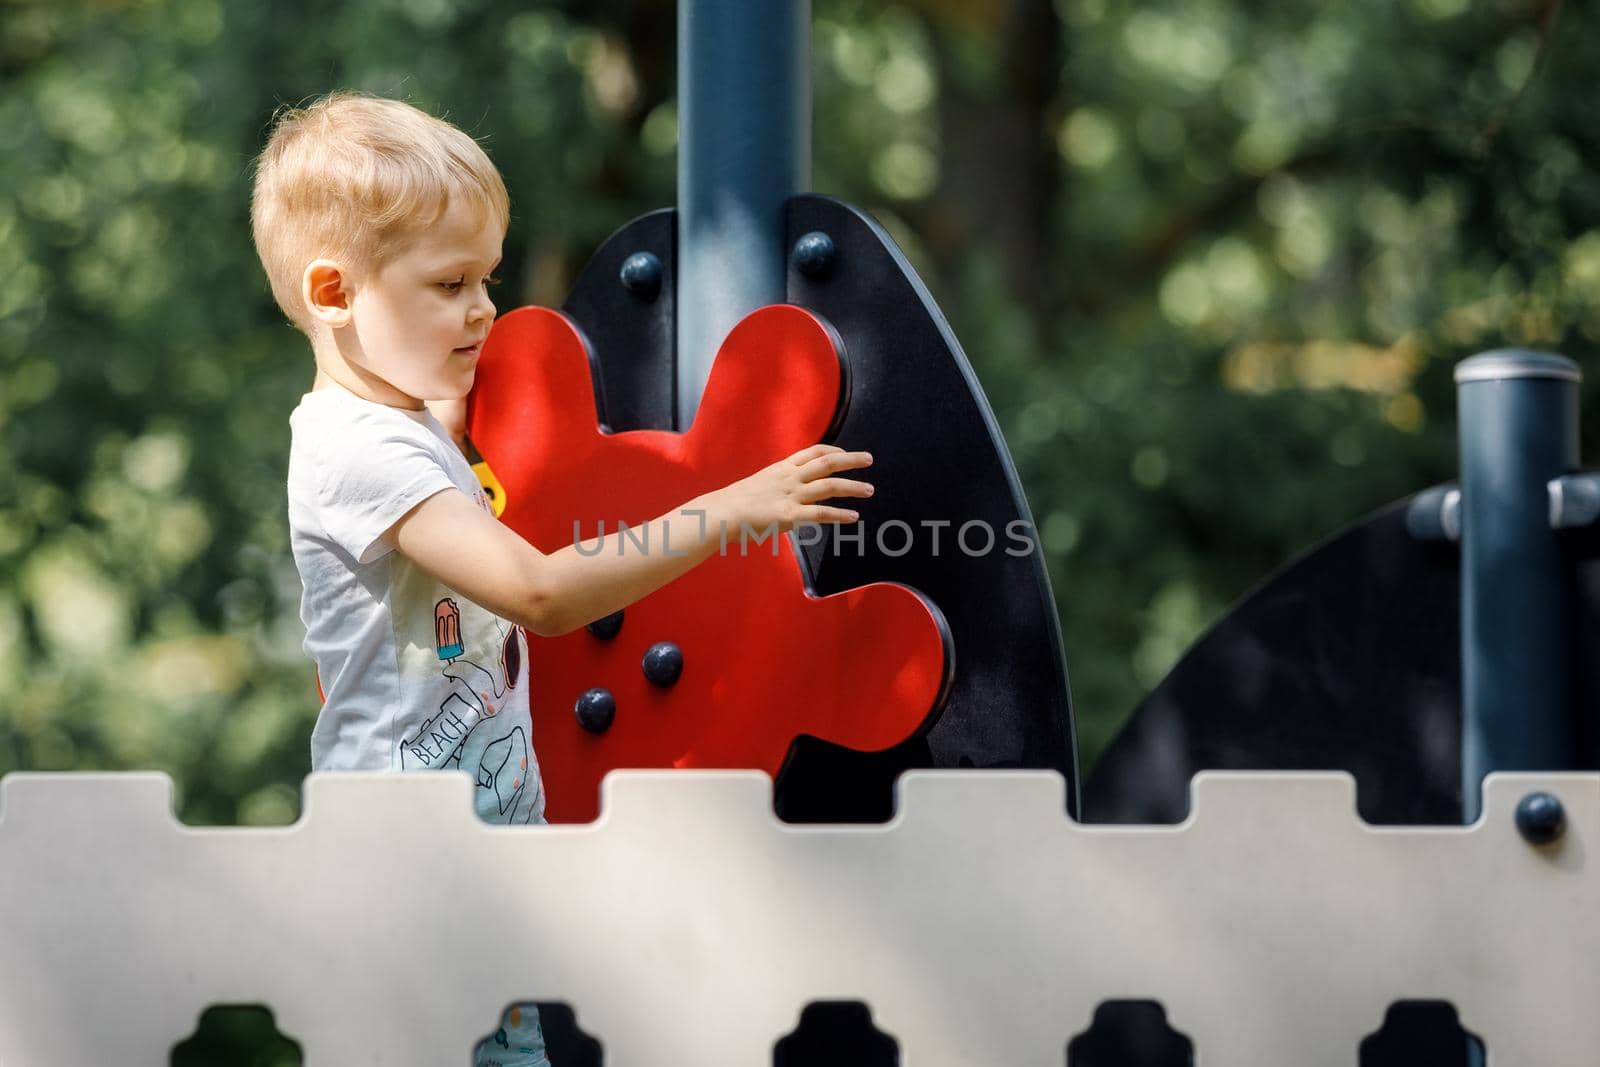 A cute boy on an outdoor playground, a red ship's helm, a decorative fence, a green foliage background.